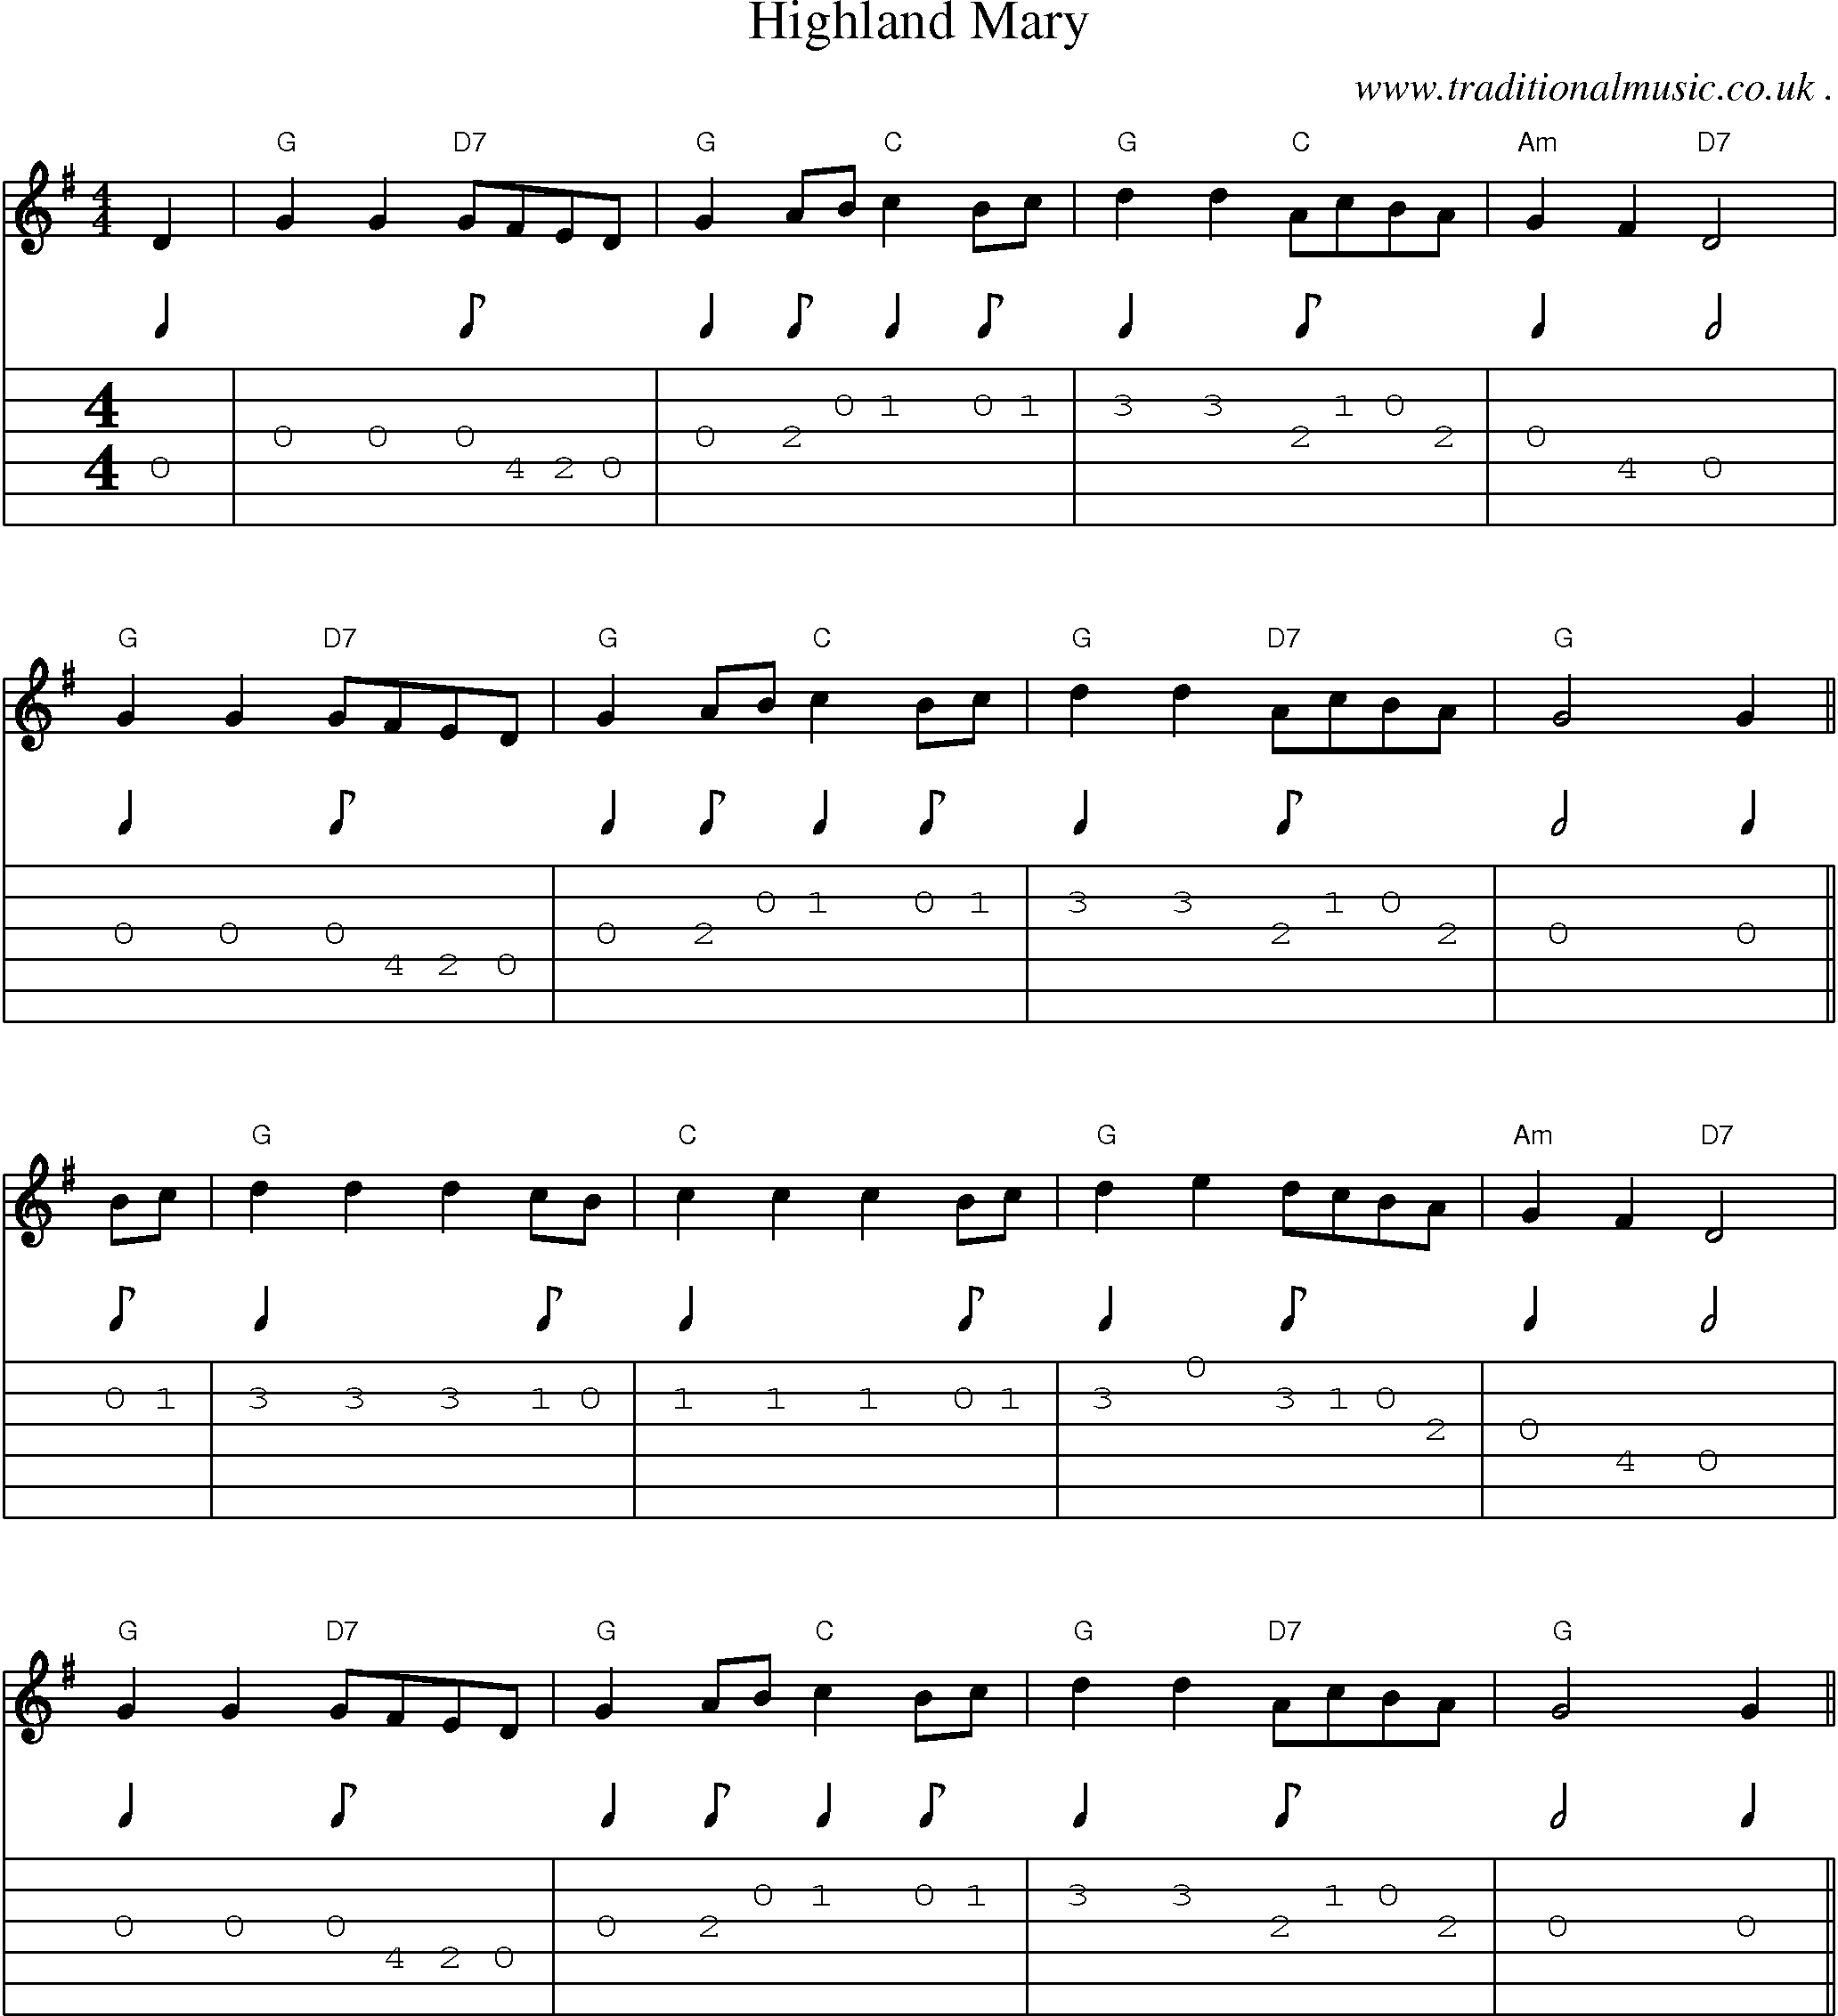 Sheet-Music and Guitar Tabs for Highland Mary